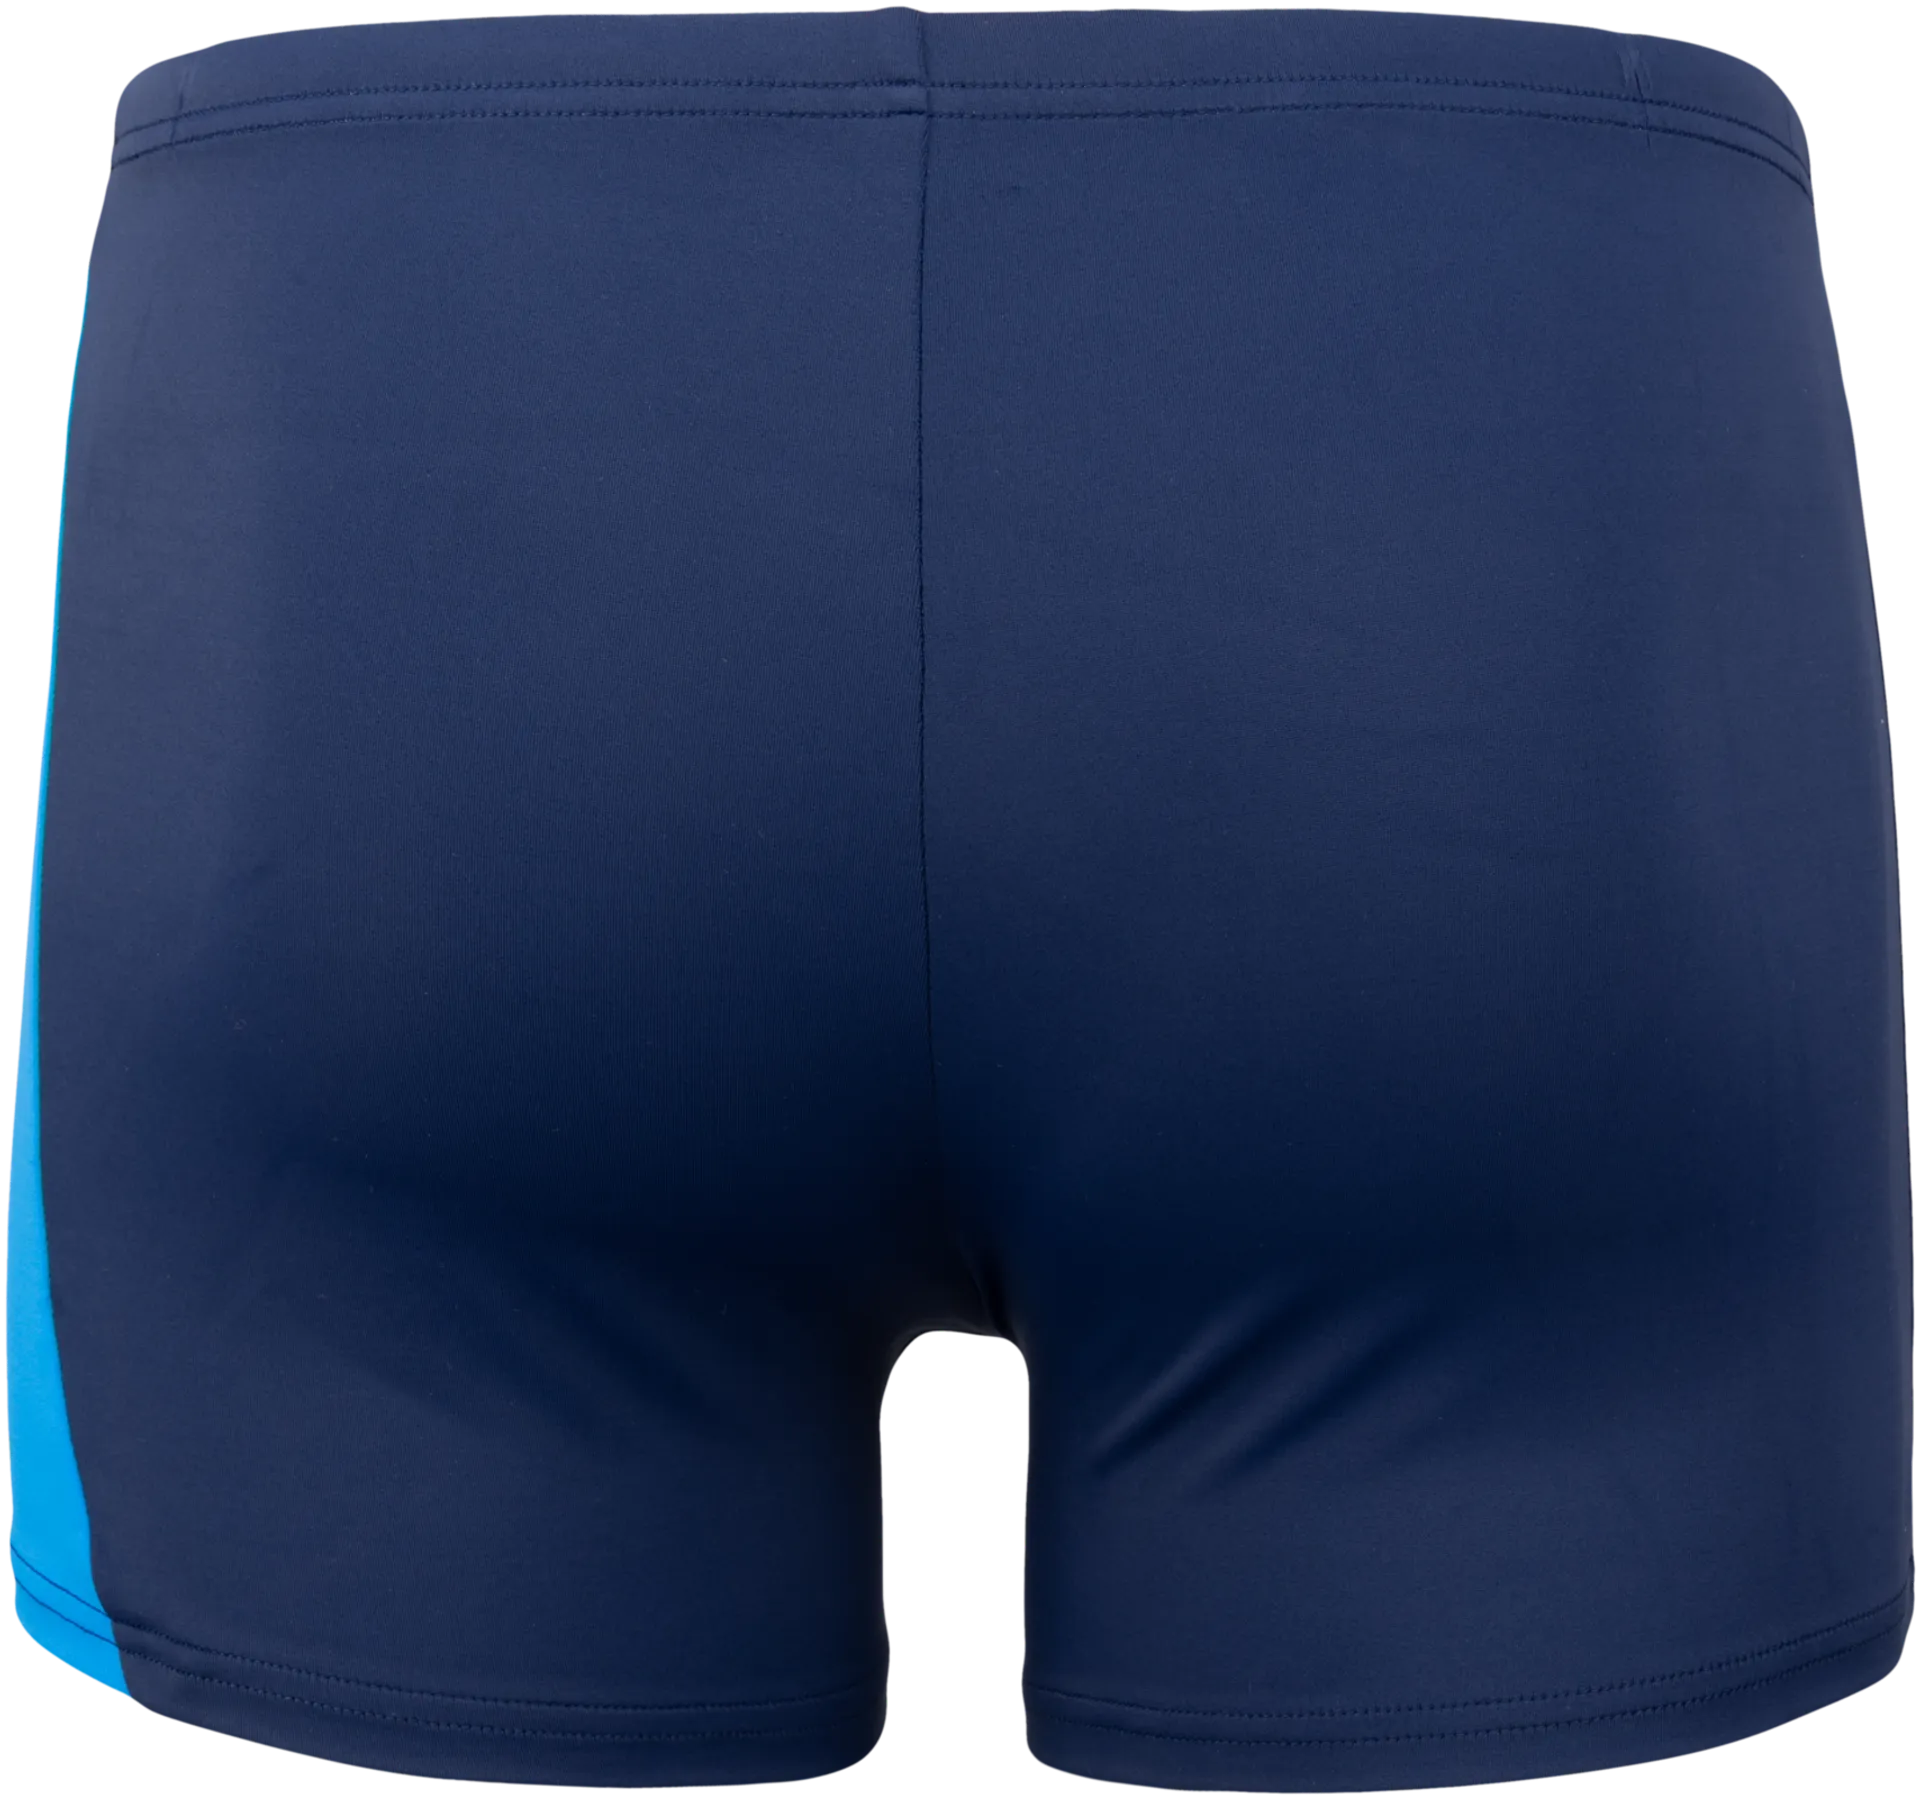 House miesten uimaboxerit 192H012402 - DARK BLUE with COL PANEL - 3